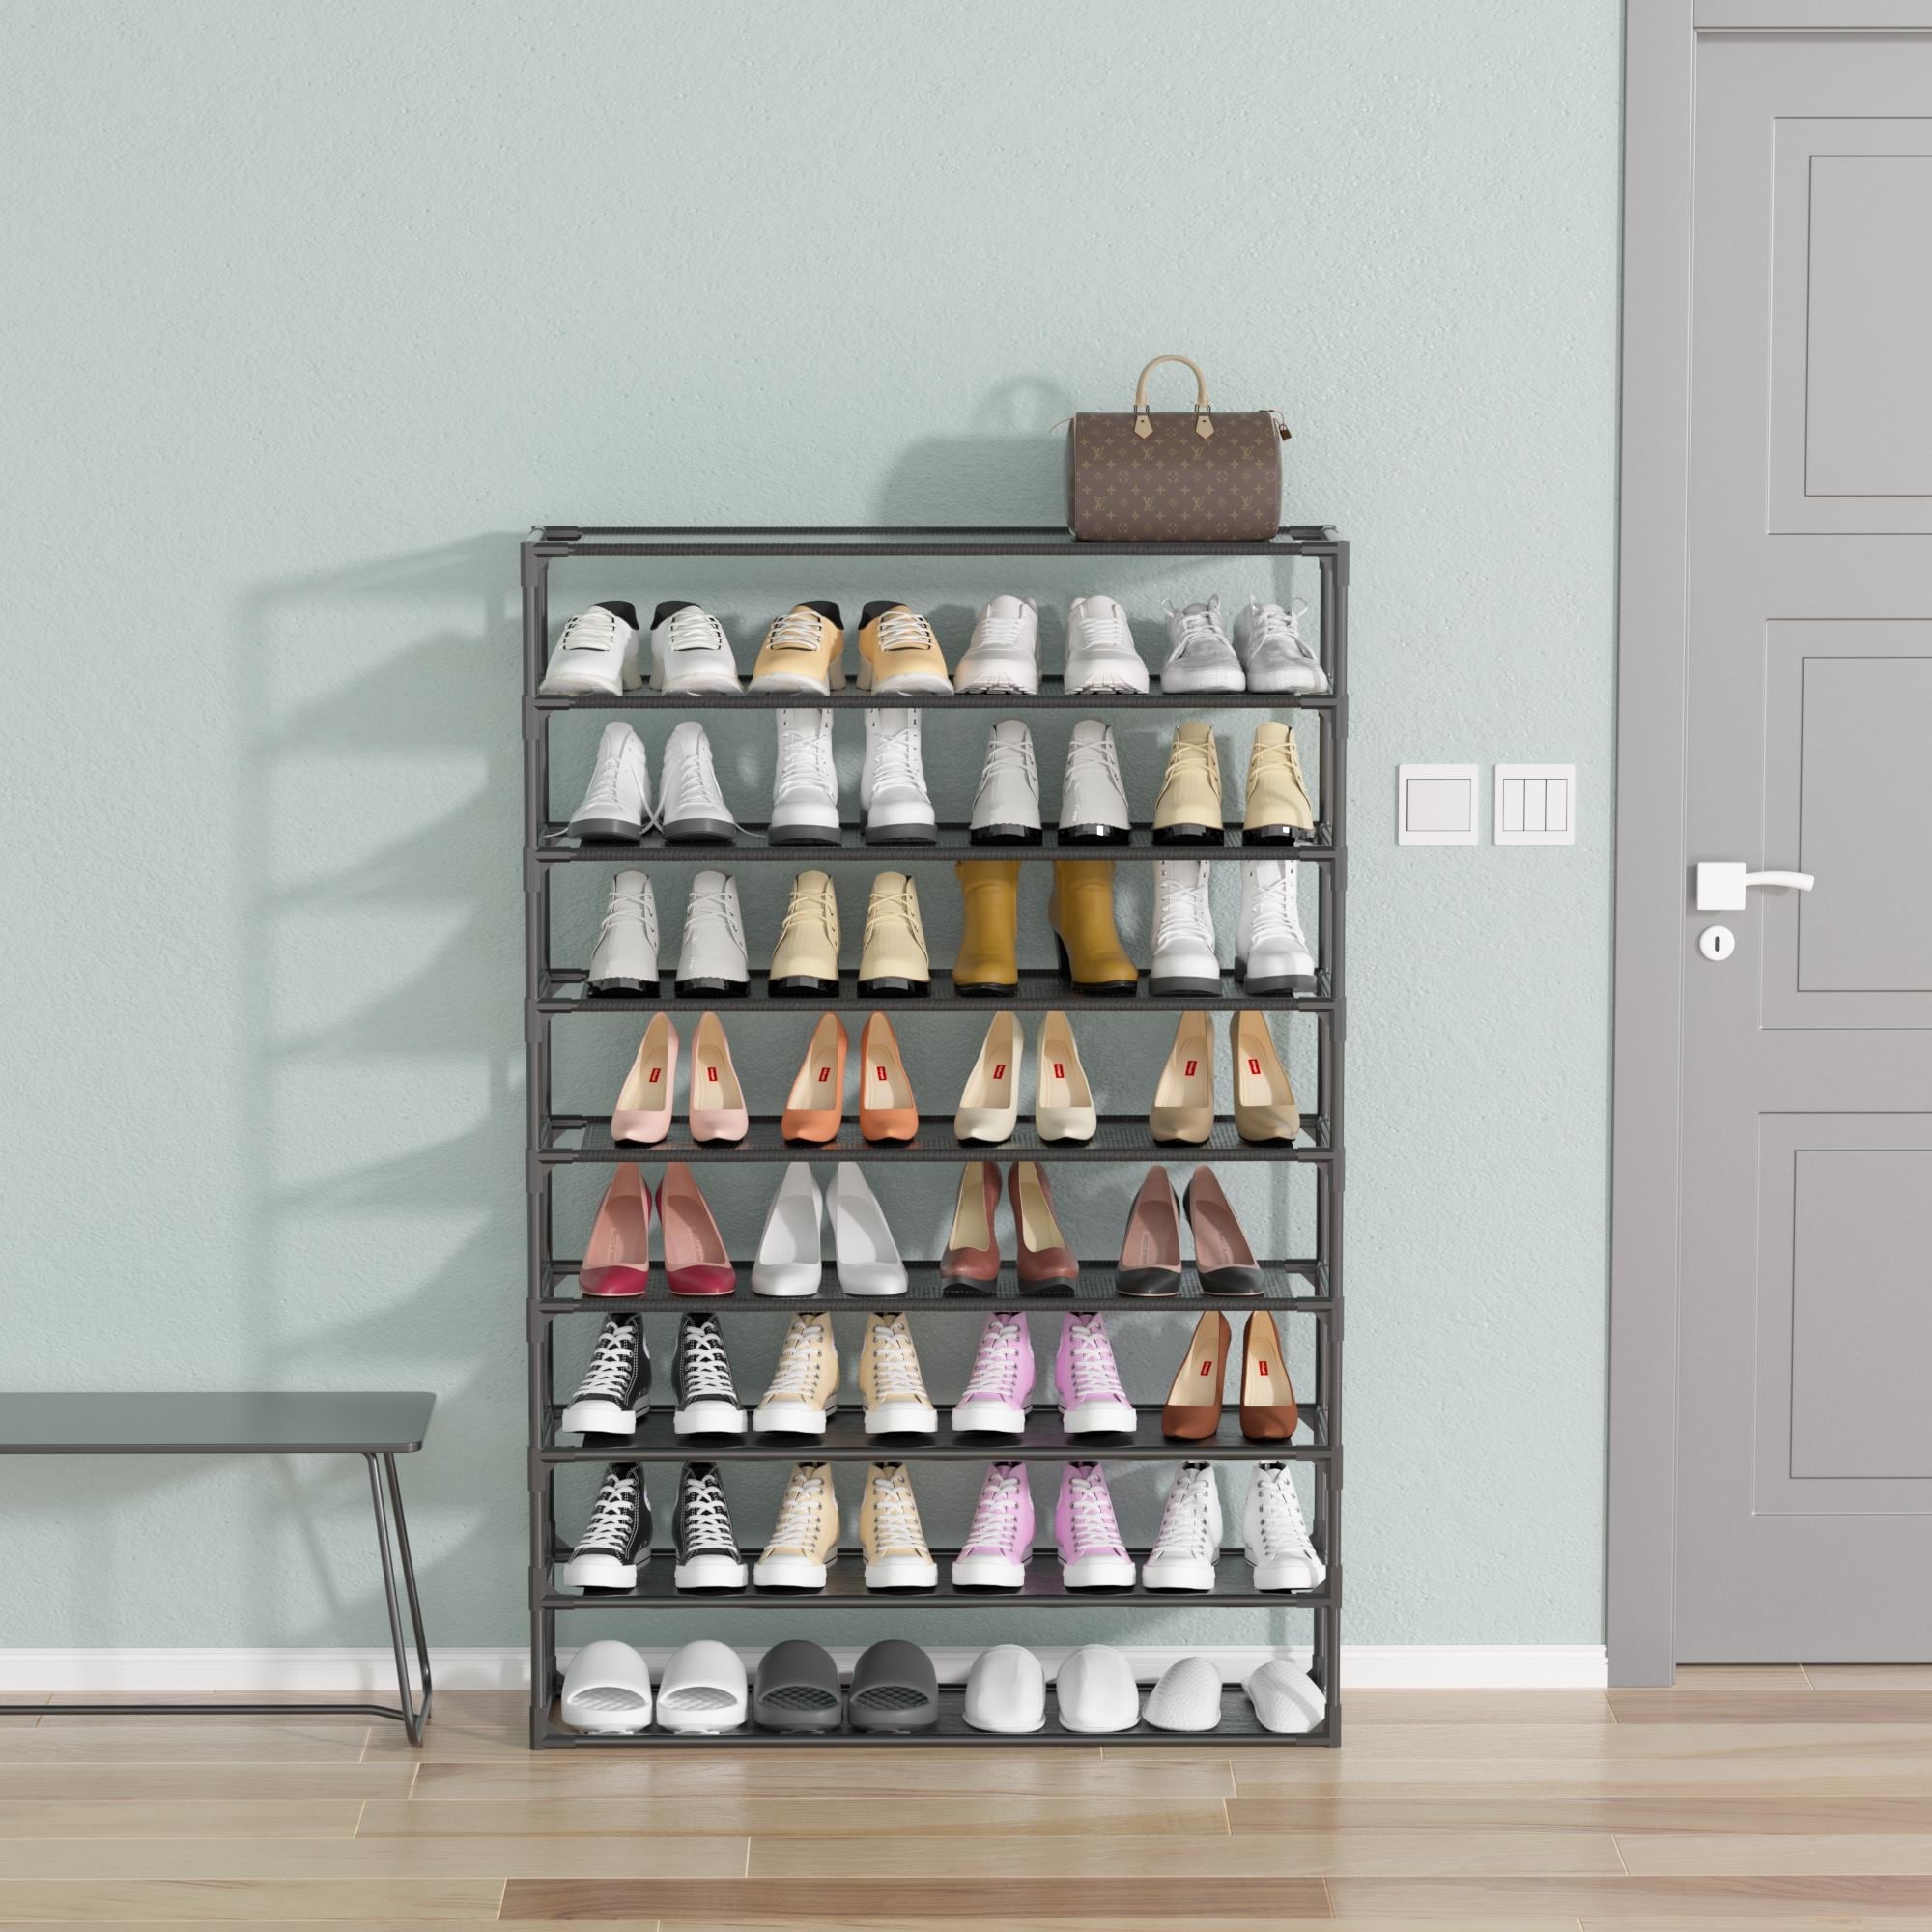 https://ak1.ostkcdn.com/images/products/is/images/direct/801874e0e098774603f88c073a7c8c67f36ce29f/5-Tier-Shoe-Rack-Detachable-Non-Woven-Waterproof-Fabric-Shoe-Organizer-Tower-Black.jpg